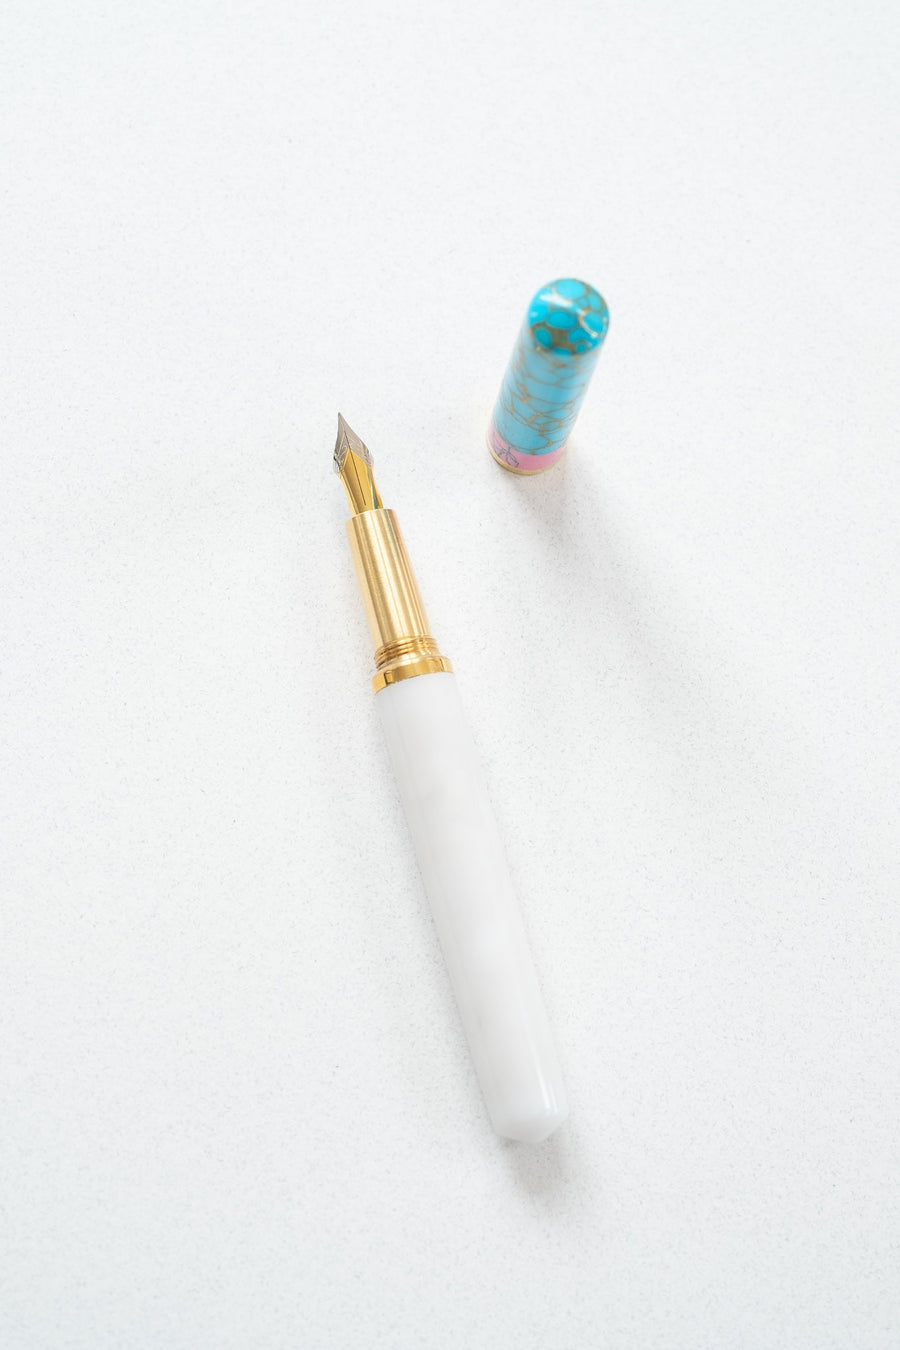 Pink + Turquoise Studio Fountain Pen with a flexible nib